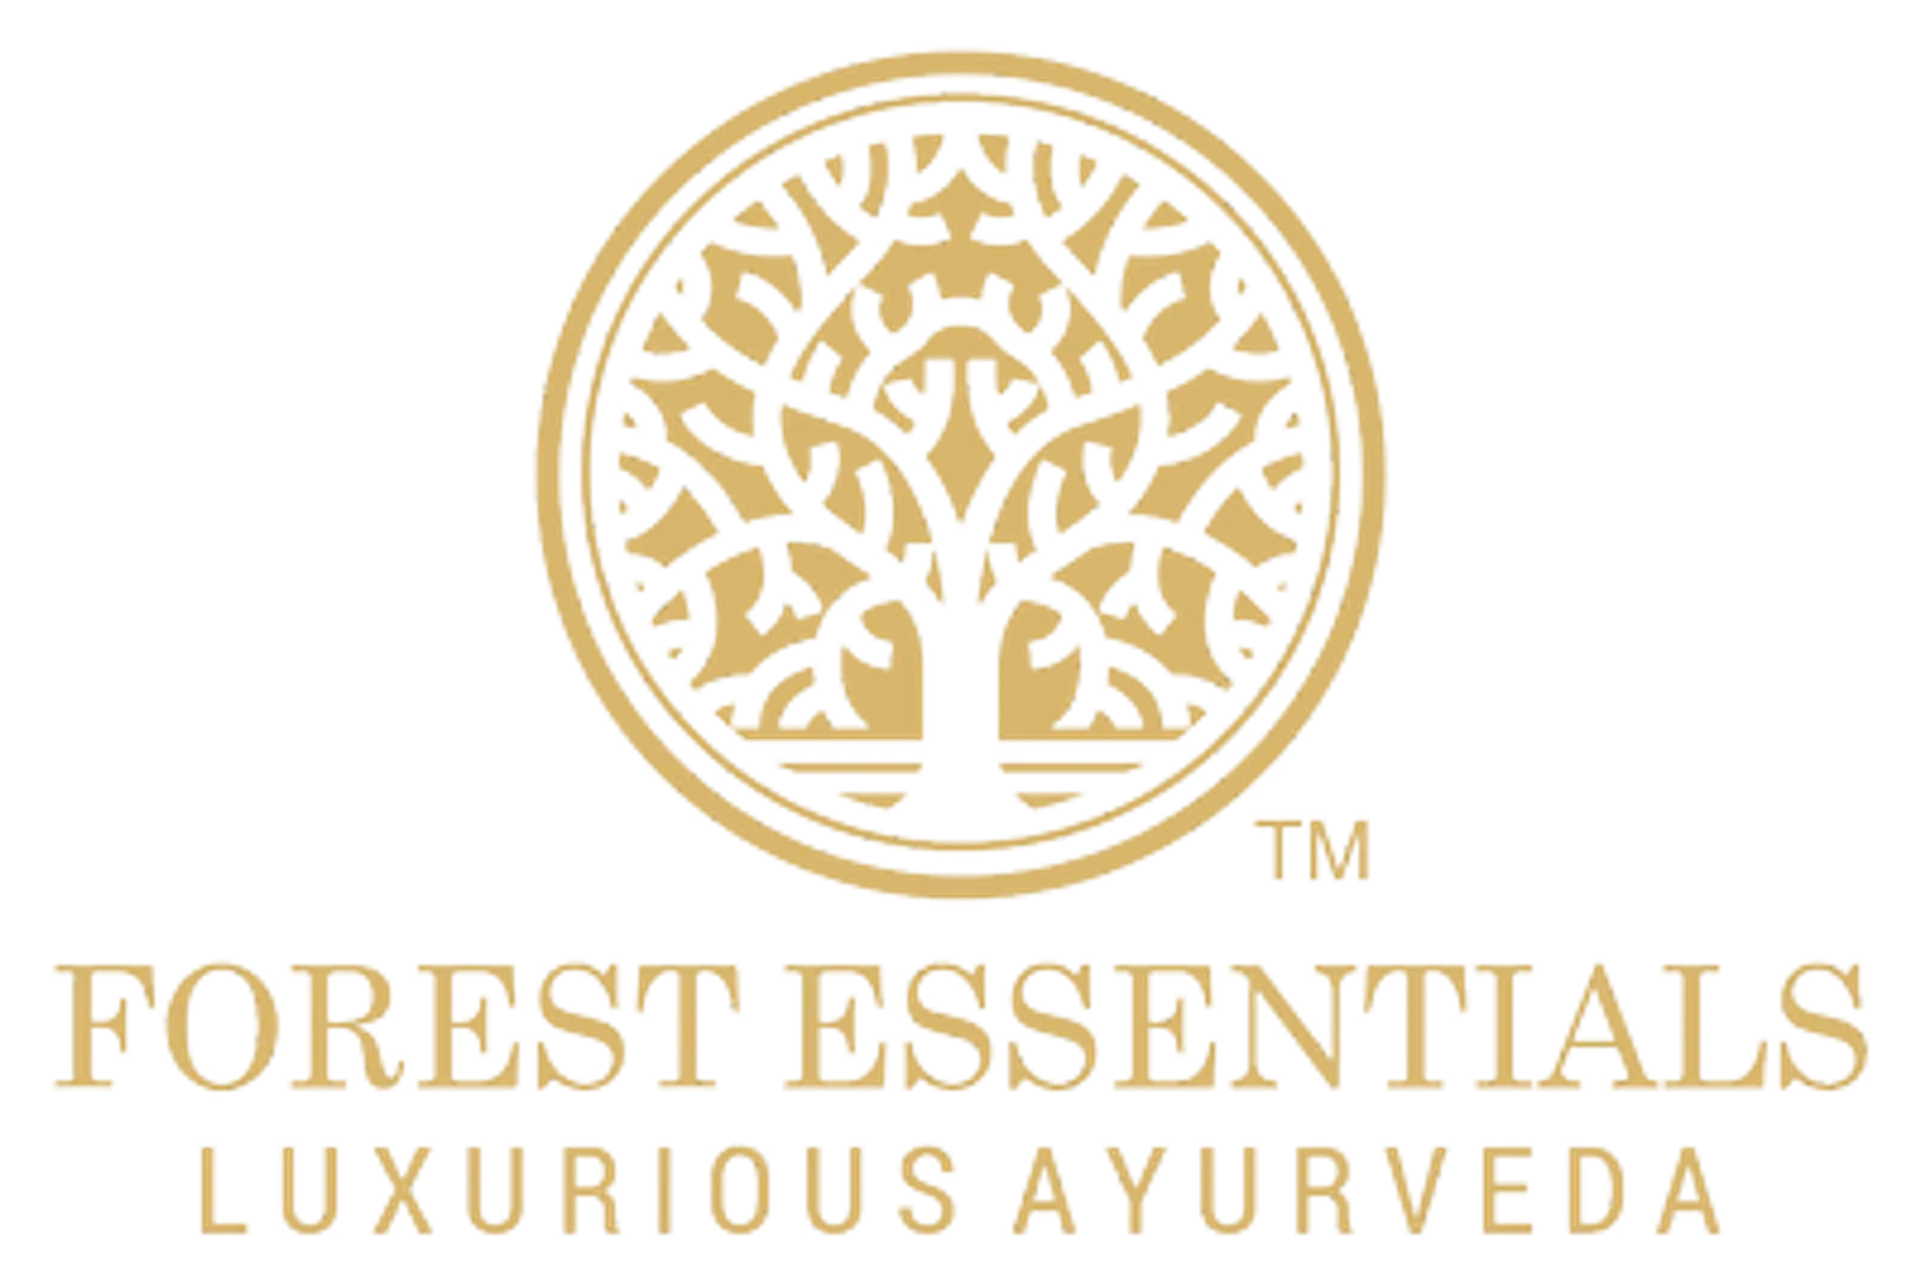 FOREST ESSENTIALS logo current weekly ad